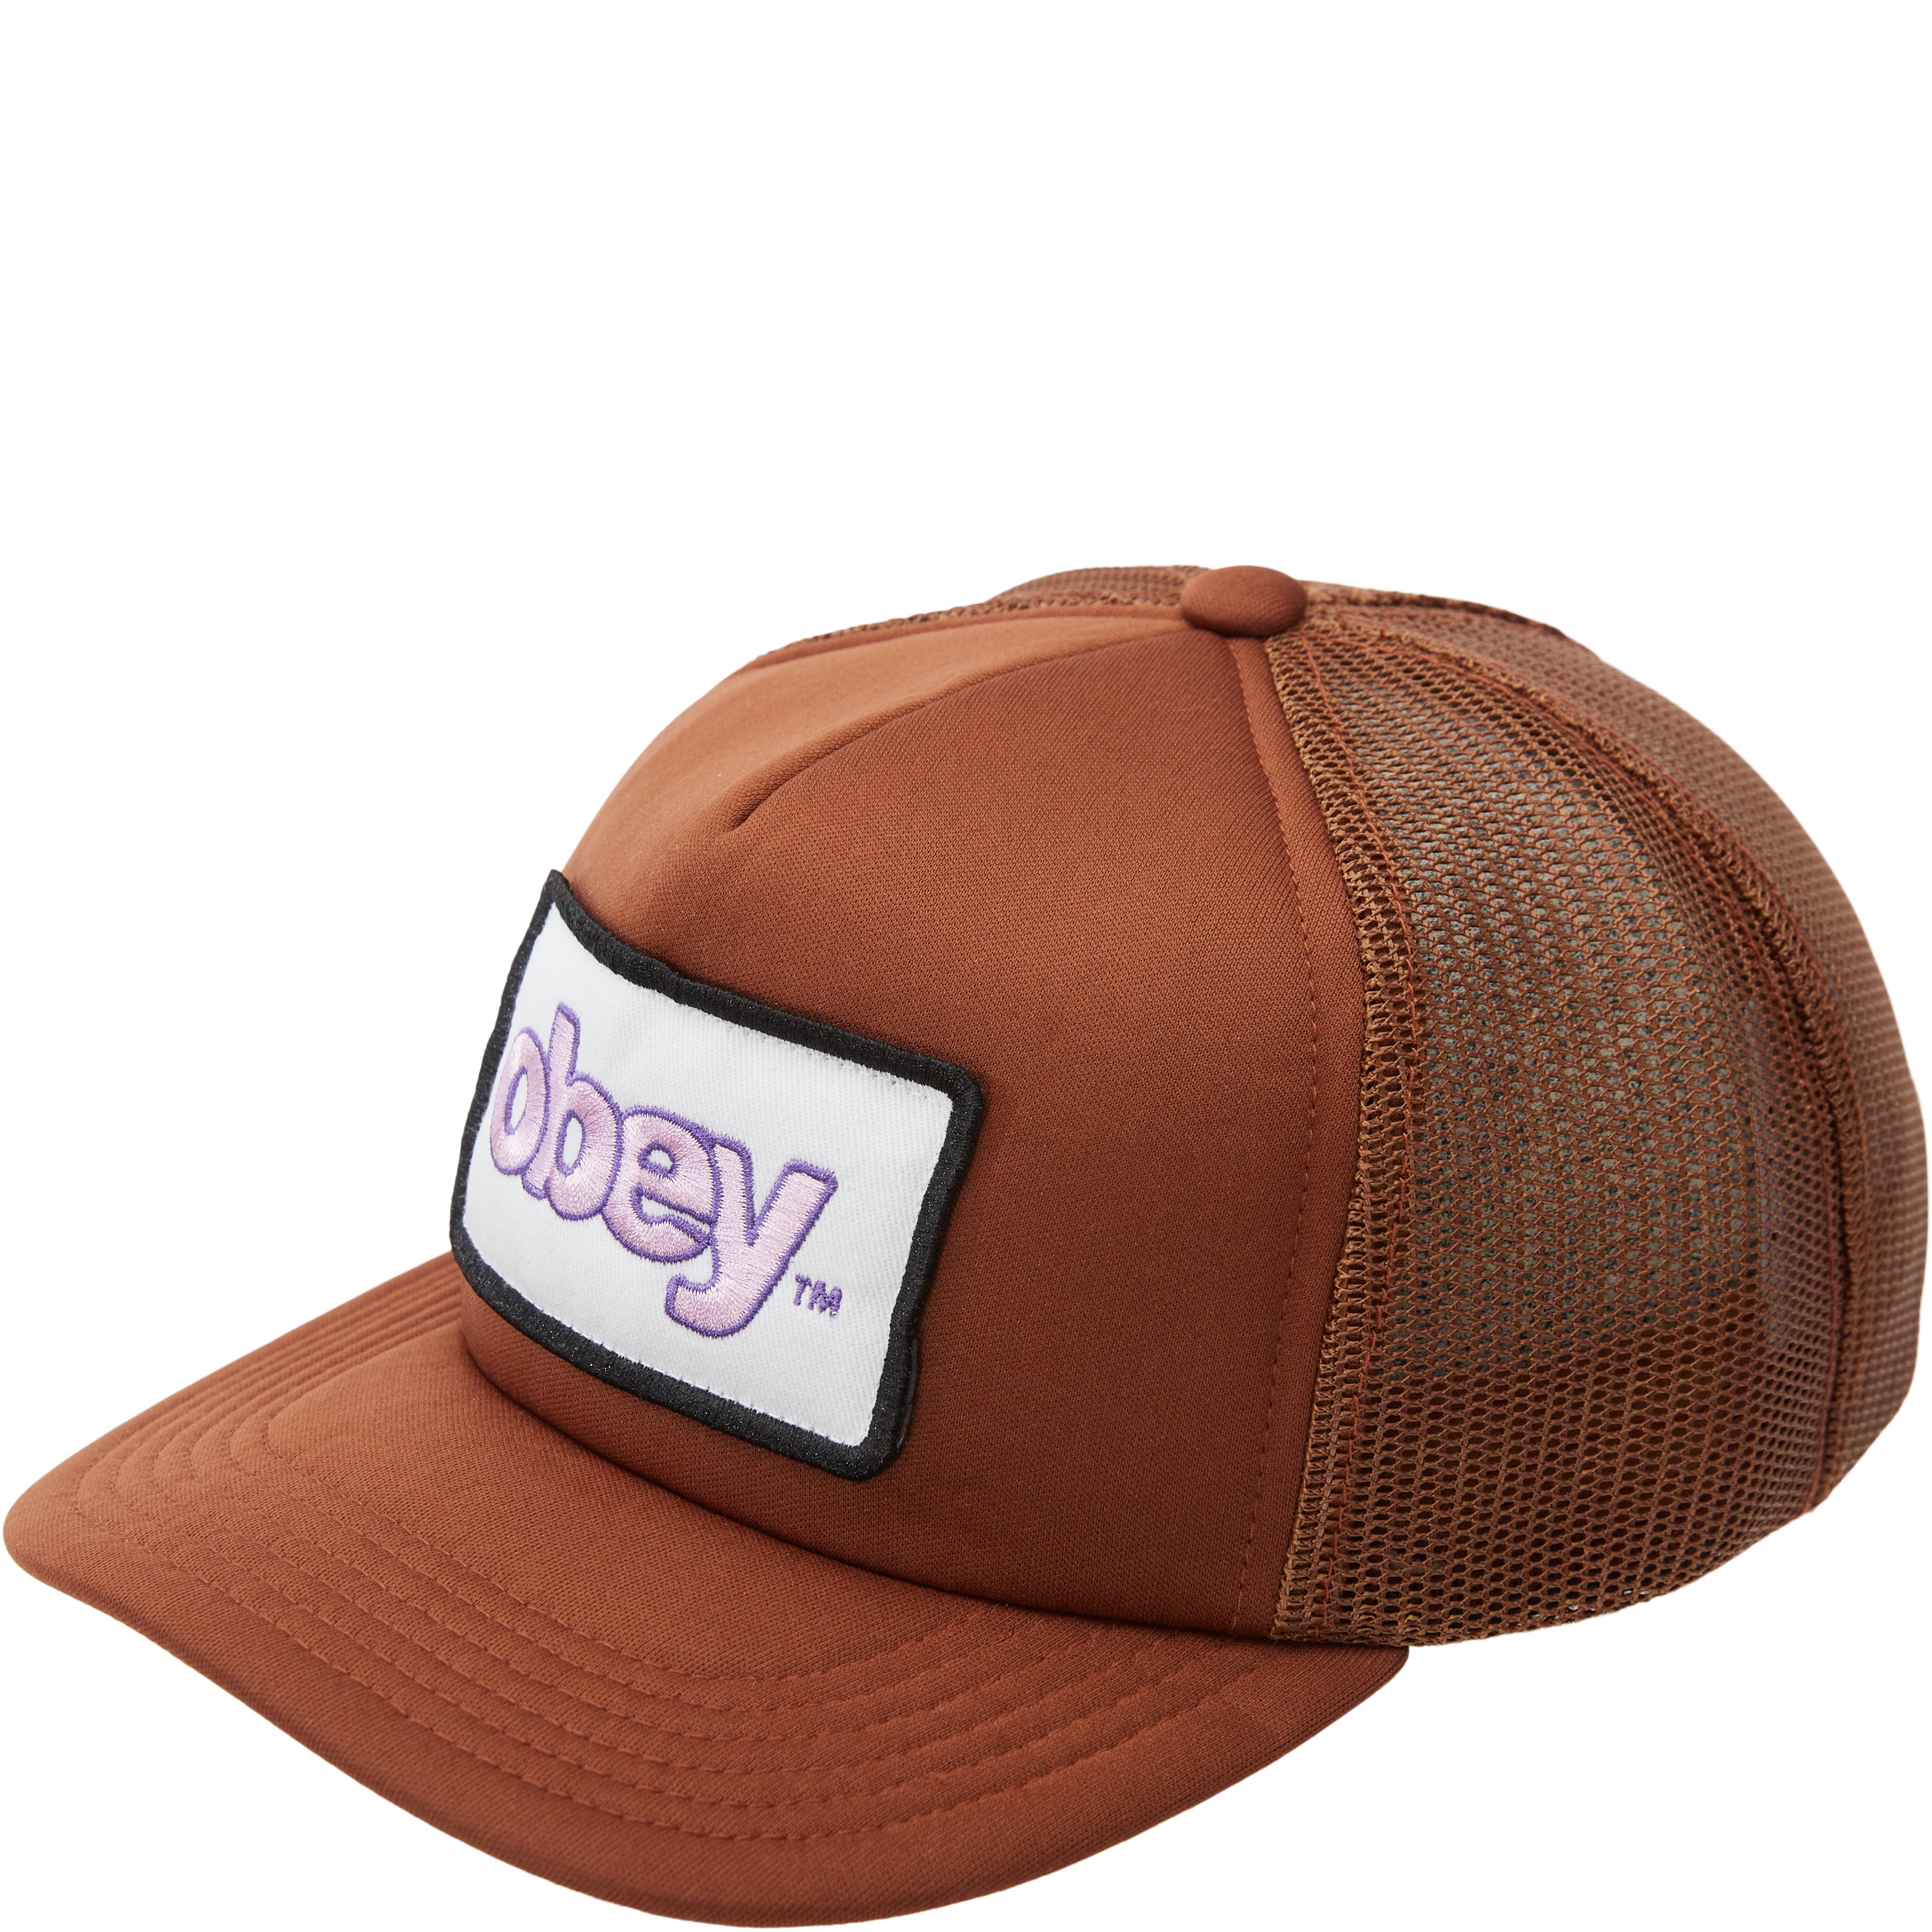 Obey Caps OBEY MARKED 100500033 Brown